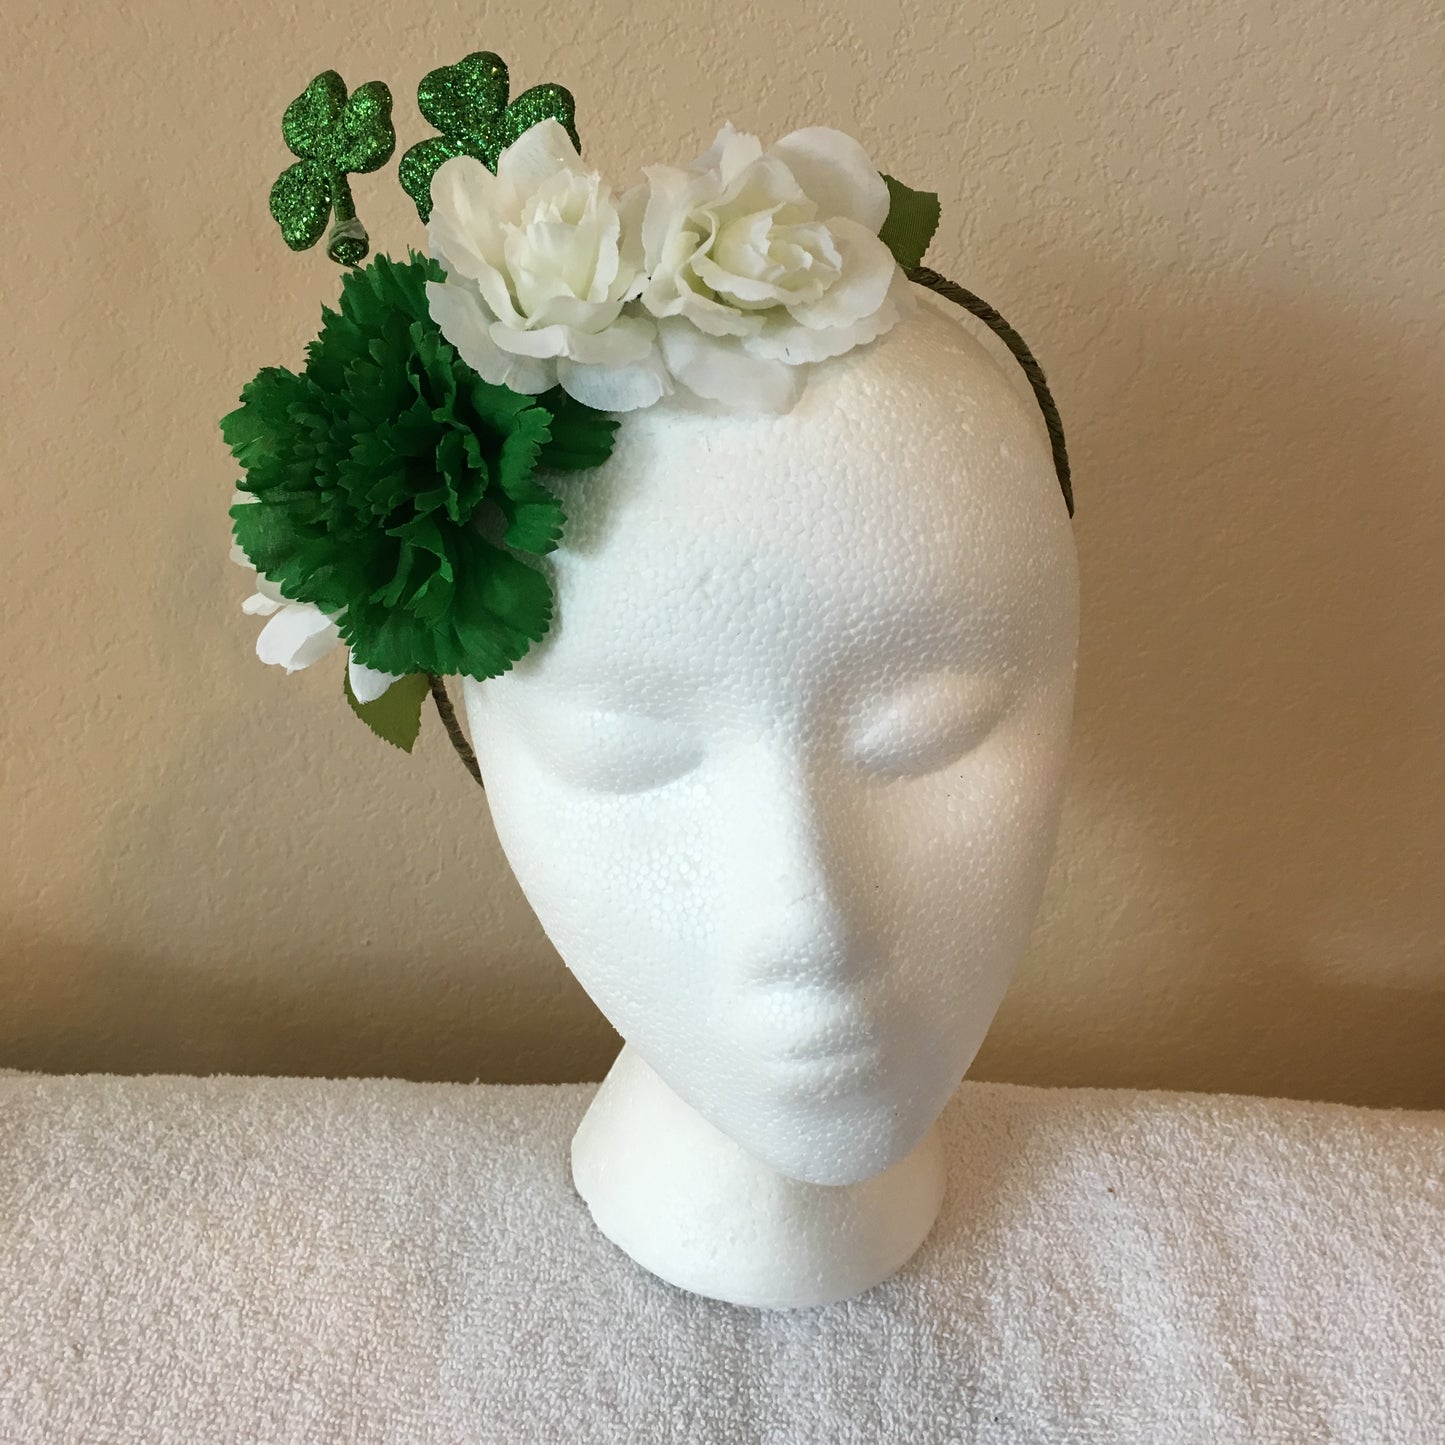 Show Special Side Wreath - One green carnations w/ three roses two shamrock accents